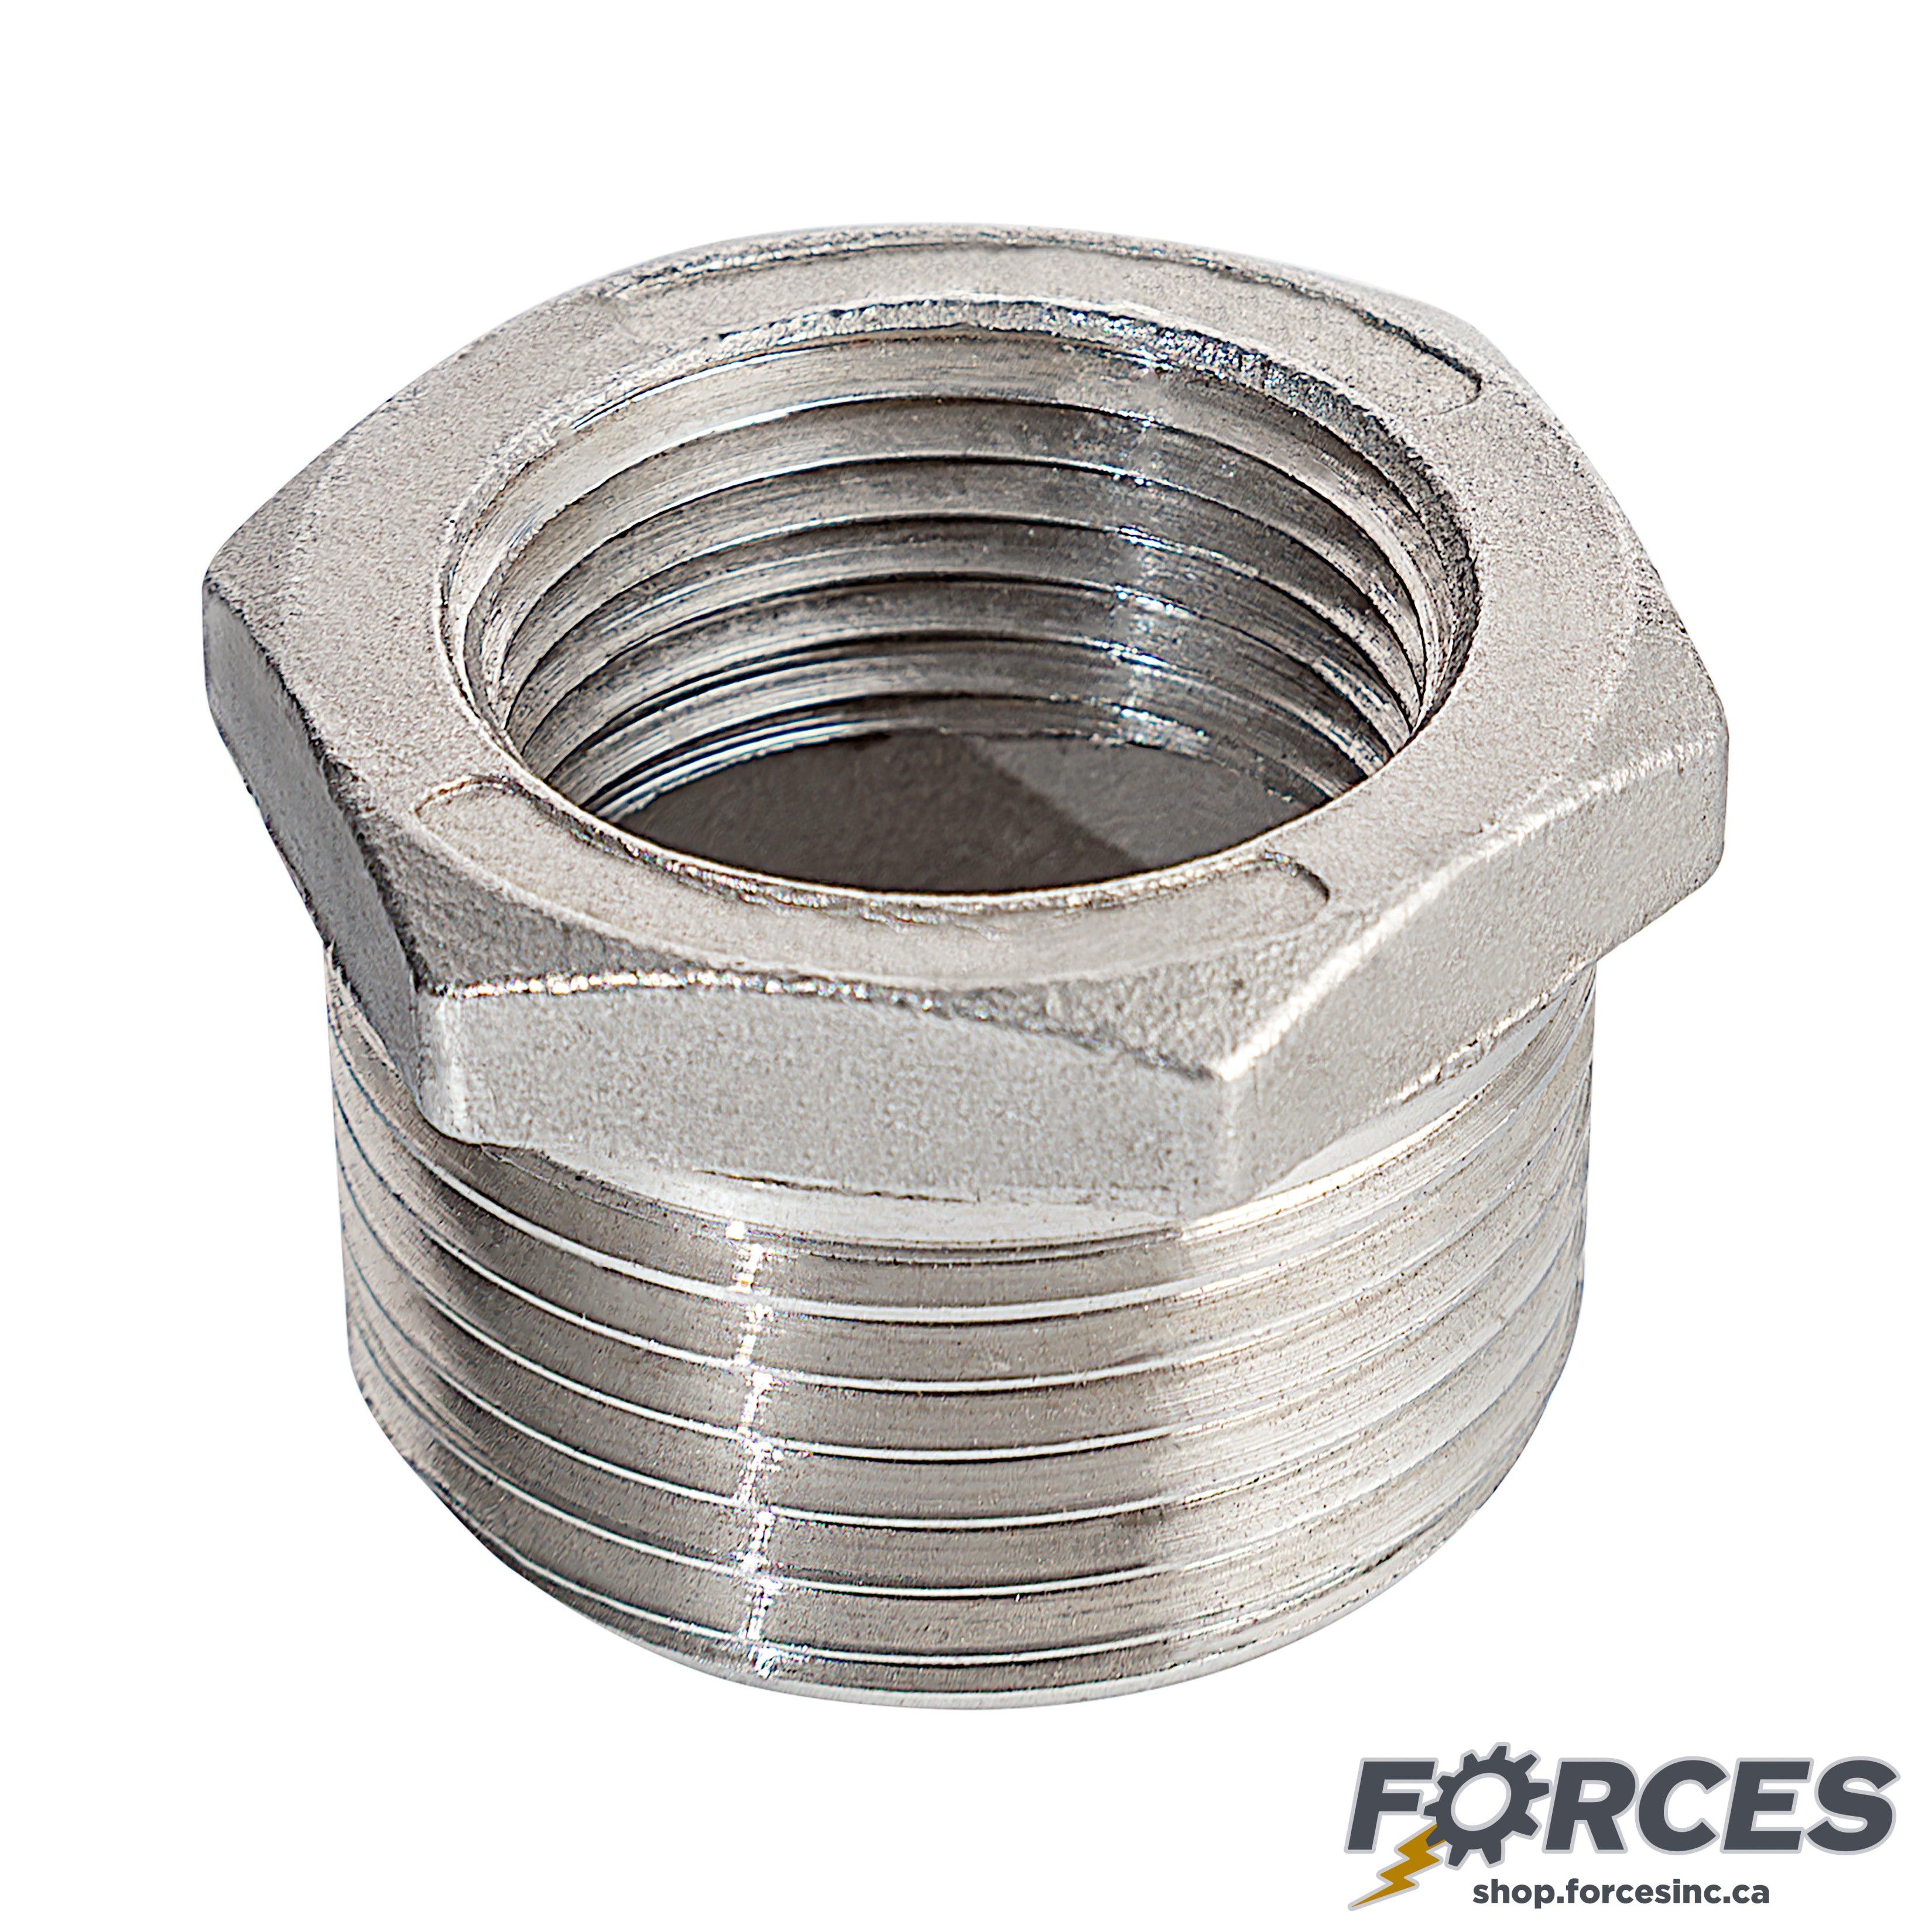 1" (M) x 1/2" (F) Reducing Hex Bushing NPT #150 - Stainless Steel 316 - Forces Inc